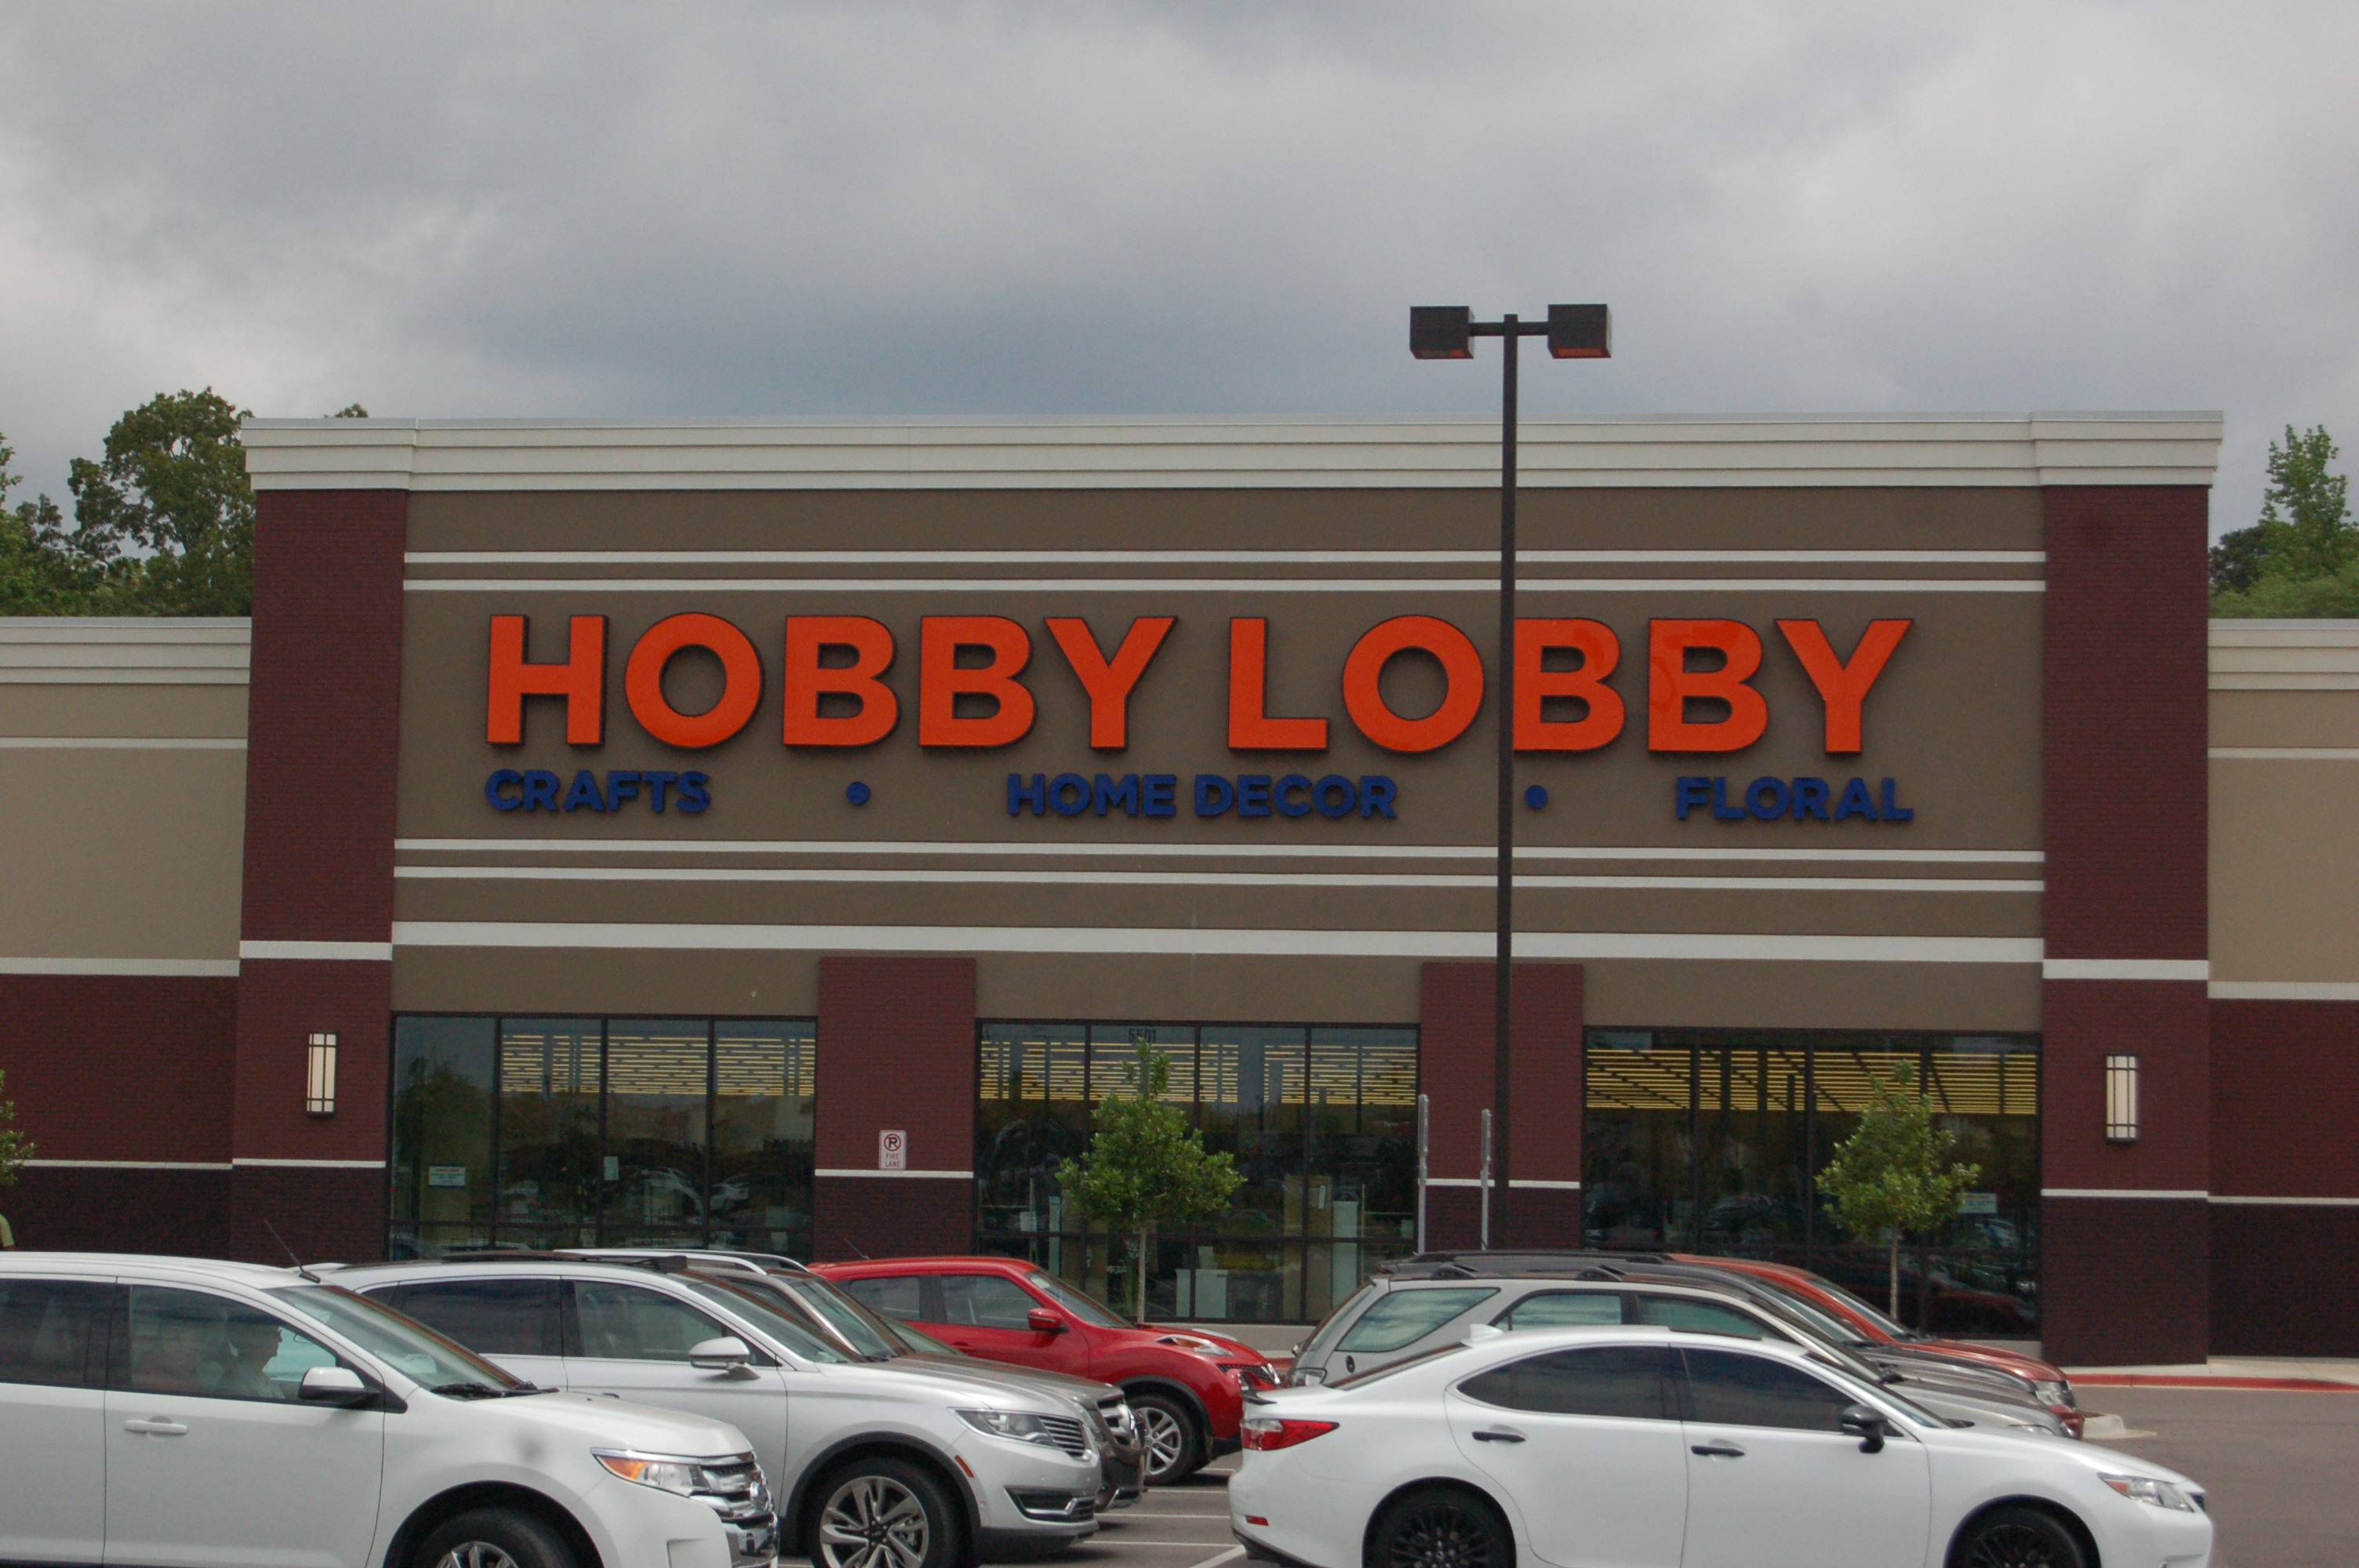 Racism allegations made against Trussville Hobby Lobby